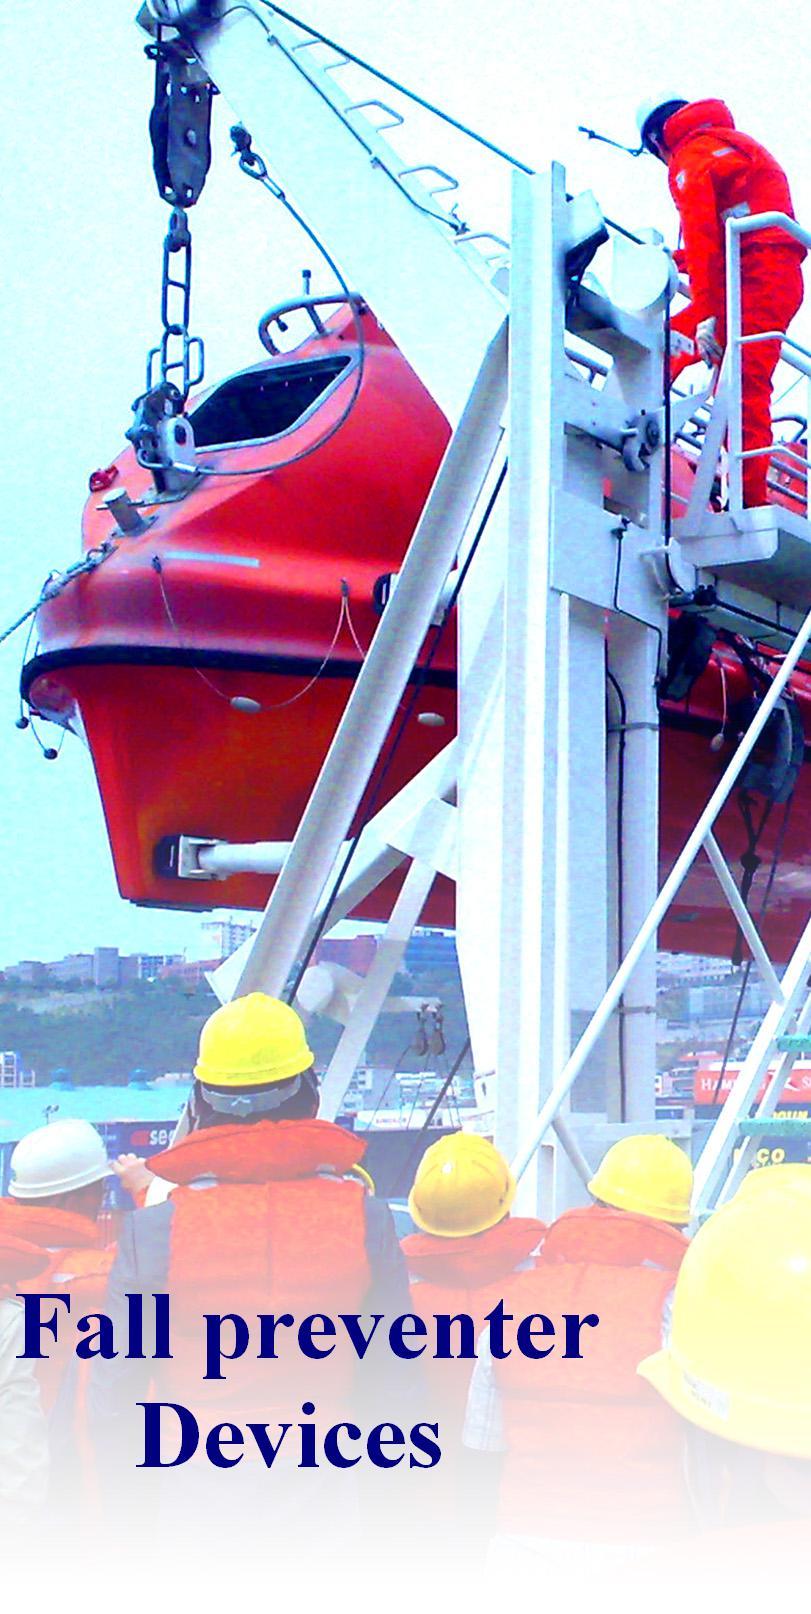 Fall preventer devices (FPDs) for lifeboats